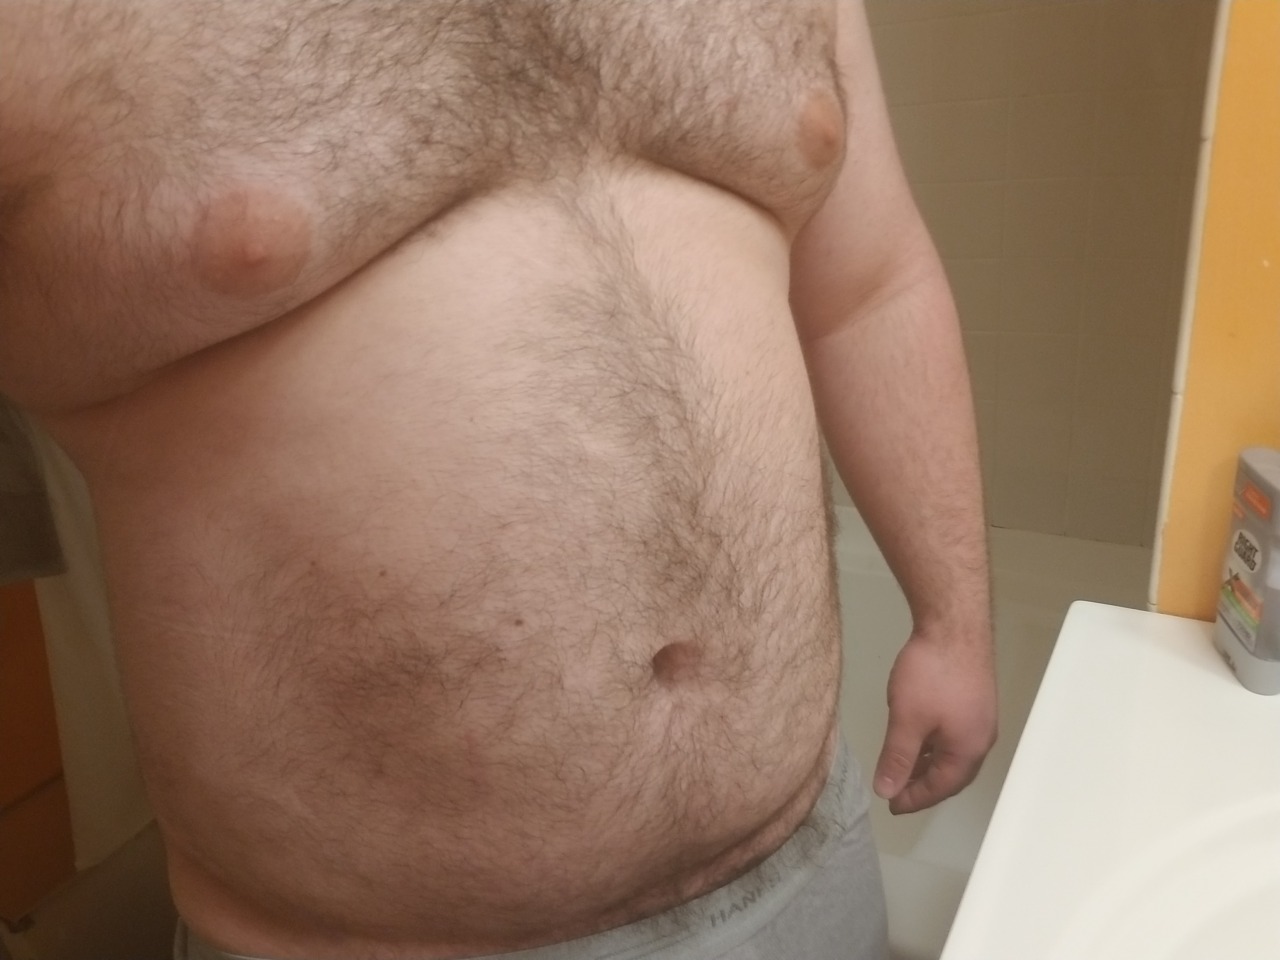 artimues:  ajthecub:  Getting a little chunky may try and lose weight but for now embracing it. Also thank you for 1,000 followers! Love you all 😘🍆🍑💦  Holy fuck he looks cuddly! Wooof